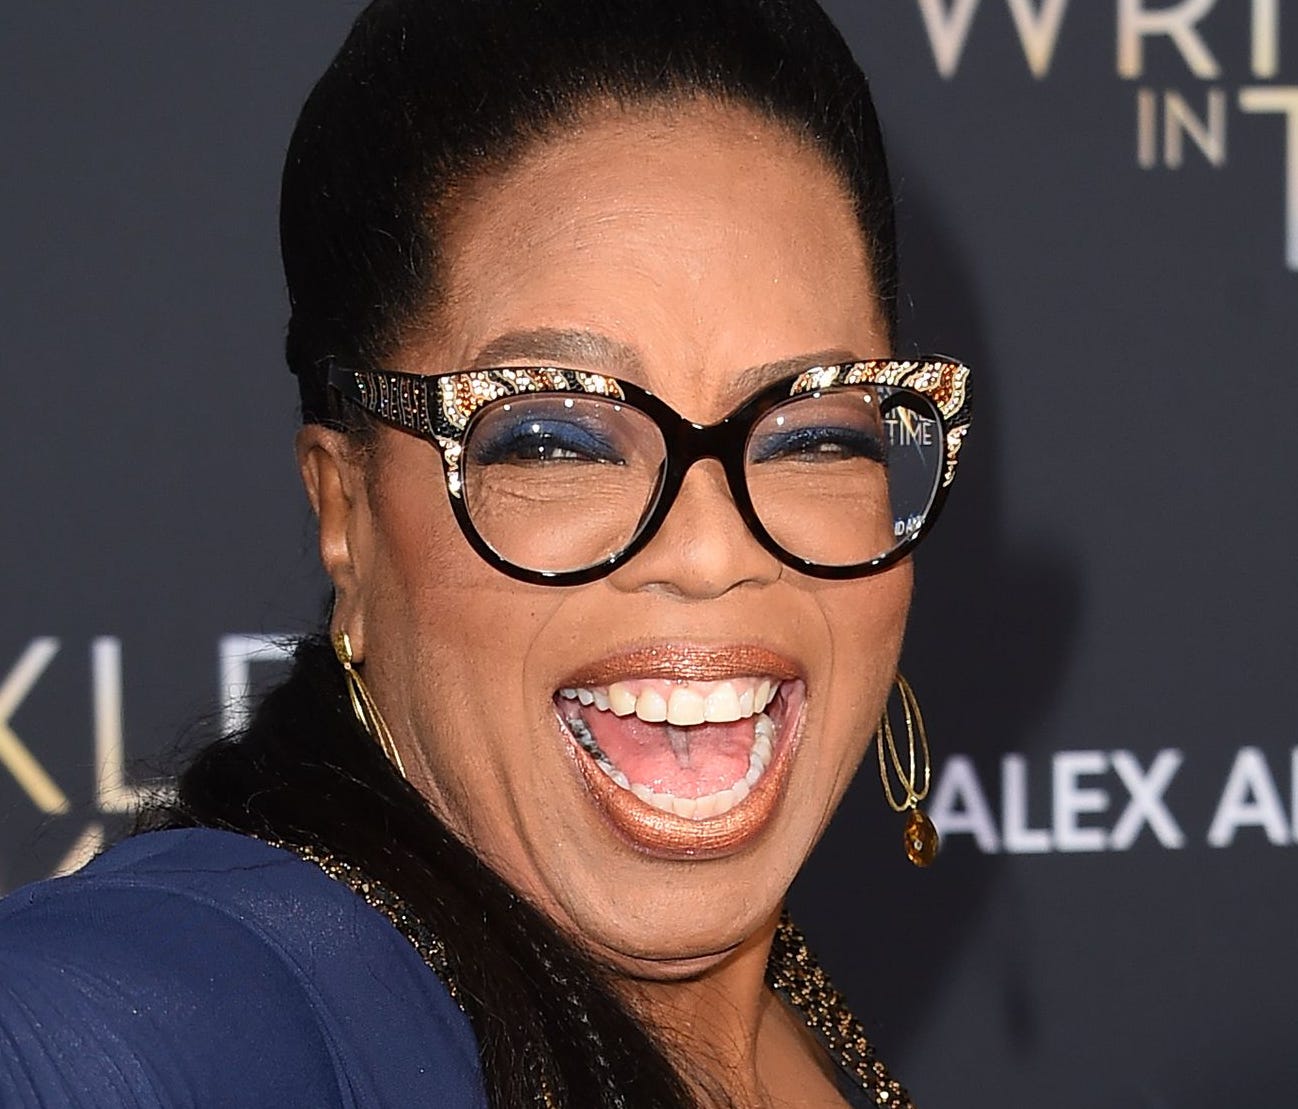 Oprah Winfrey comes in navy to the blue carpet for Disney's 'A Wrinkle in Time' premiere, at the El Capitan Theatre, in Hollywood.